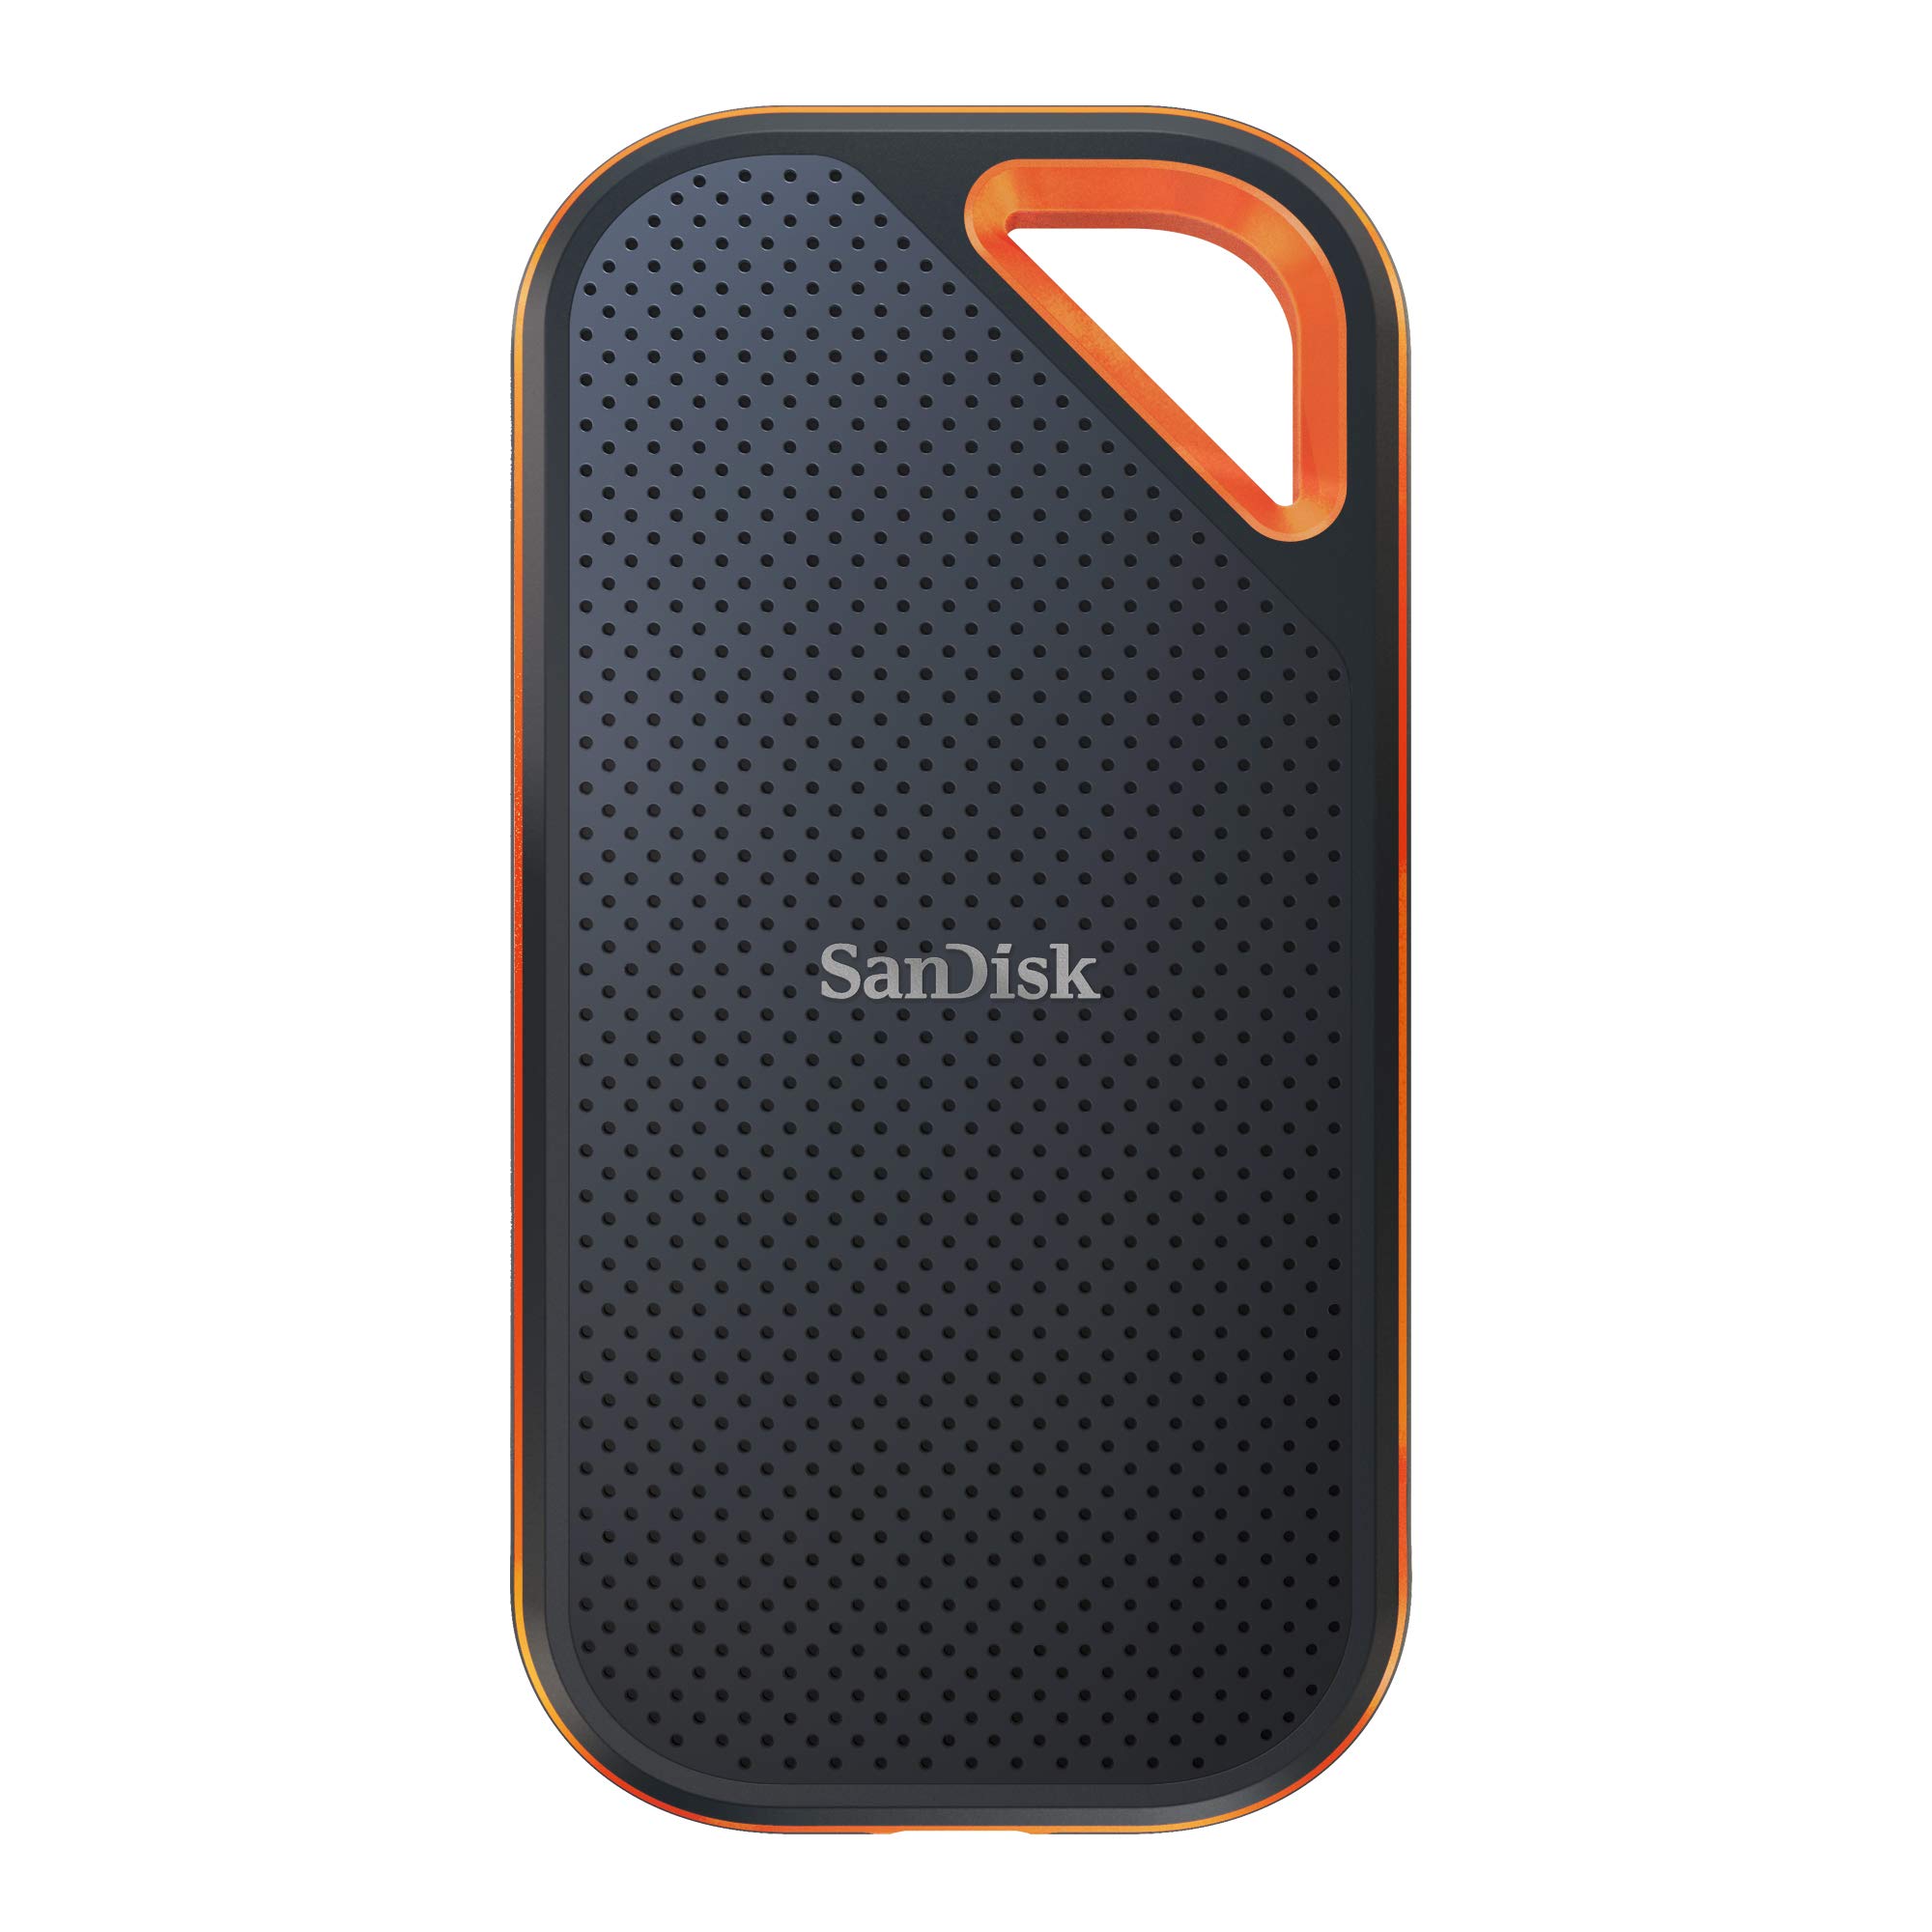 SanDisk 4TB Extreme PRO Portable SSD - Up to 2000MB/s - USB-C, USB 3.2 Gen 2x2 - External Solid State Drive - SDSSDE81-4T00-G25 - $359.99